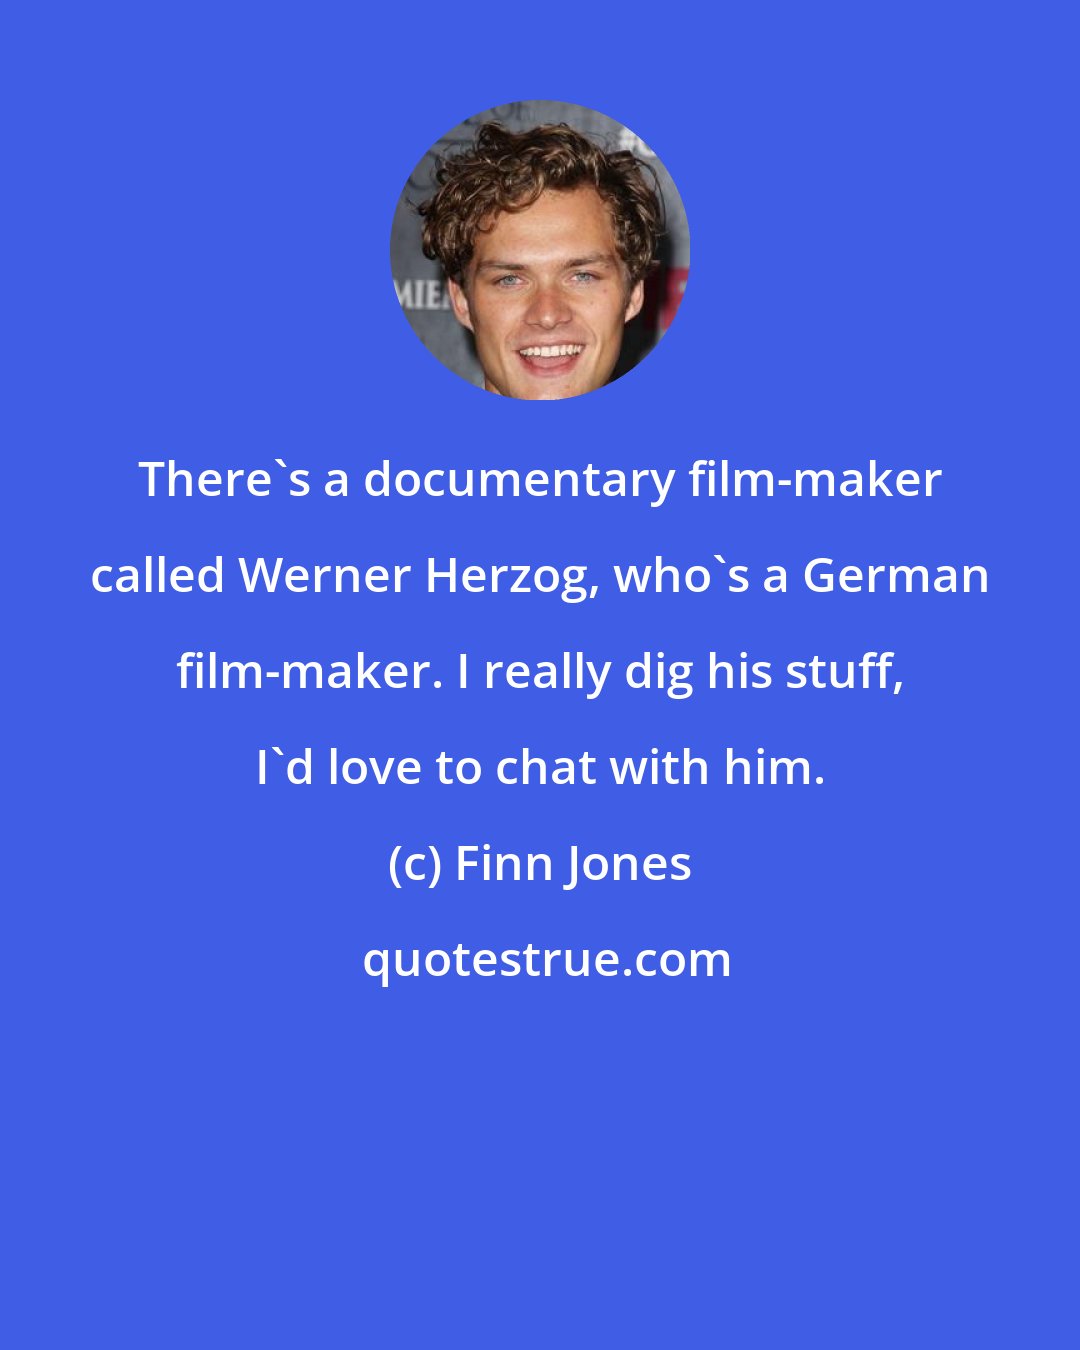 Finn Jones: There's a documentary film-maker called Werner Herzog, who's a German film-maker. I really dig his stuff, I'd love to chat with him.